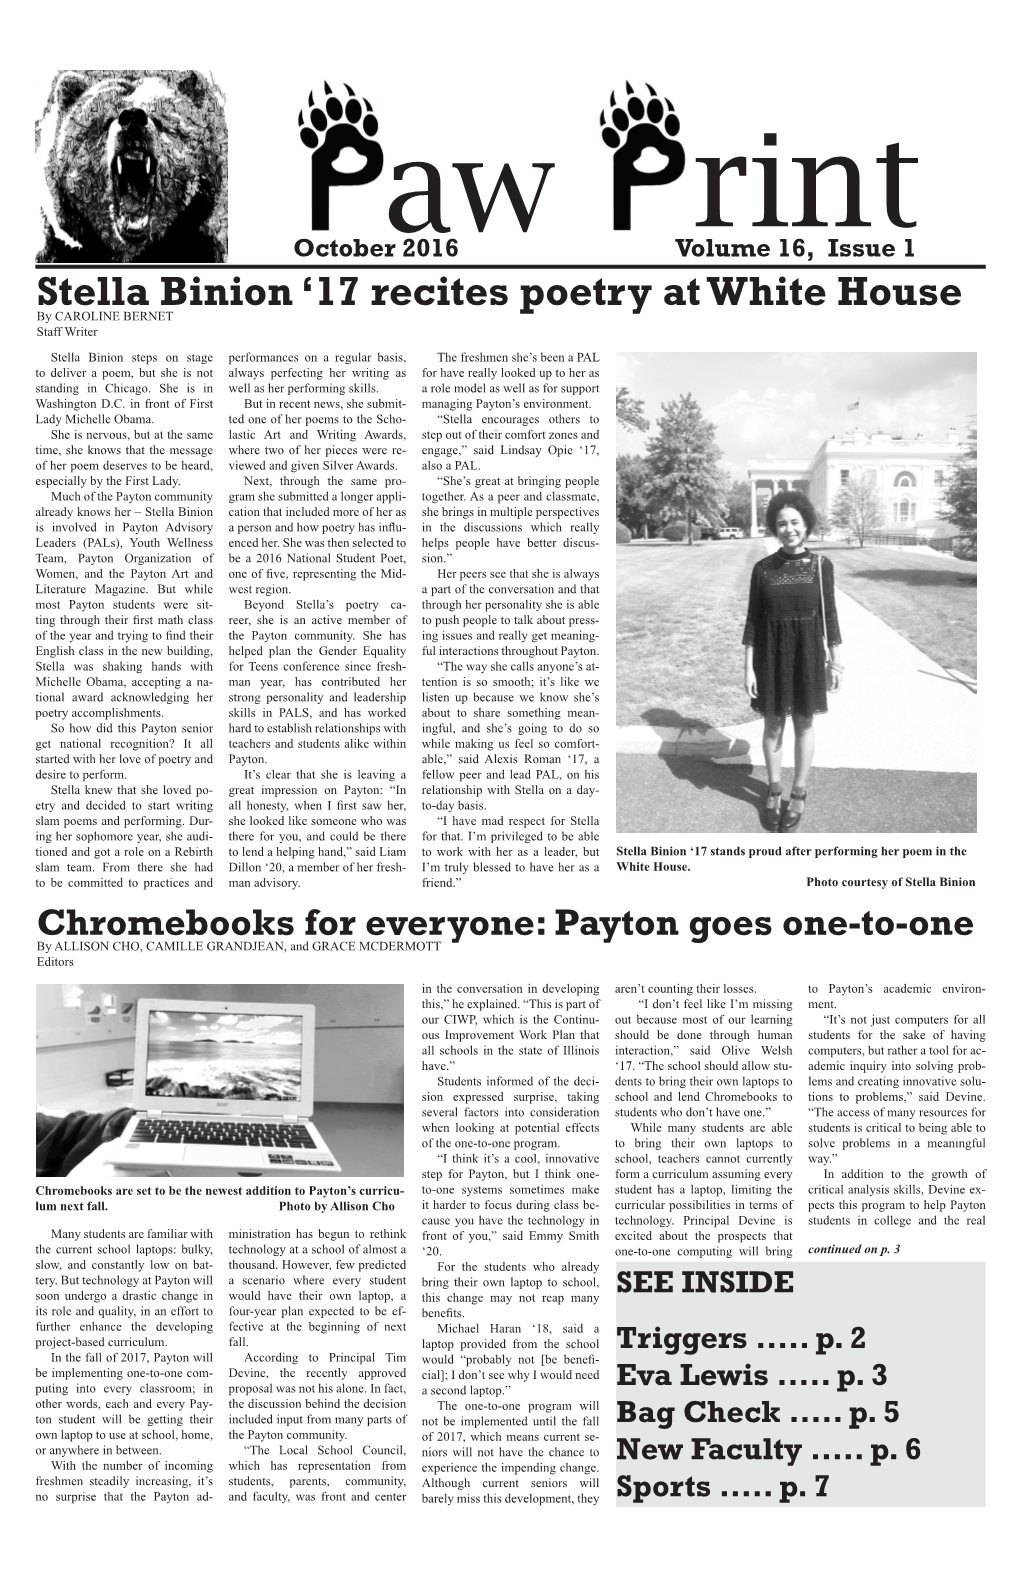 Stella Binion '17 Recites Poetry at White House